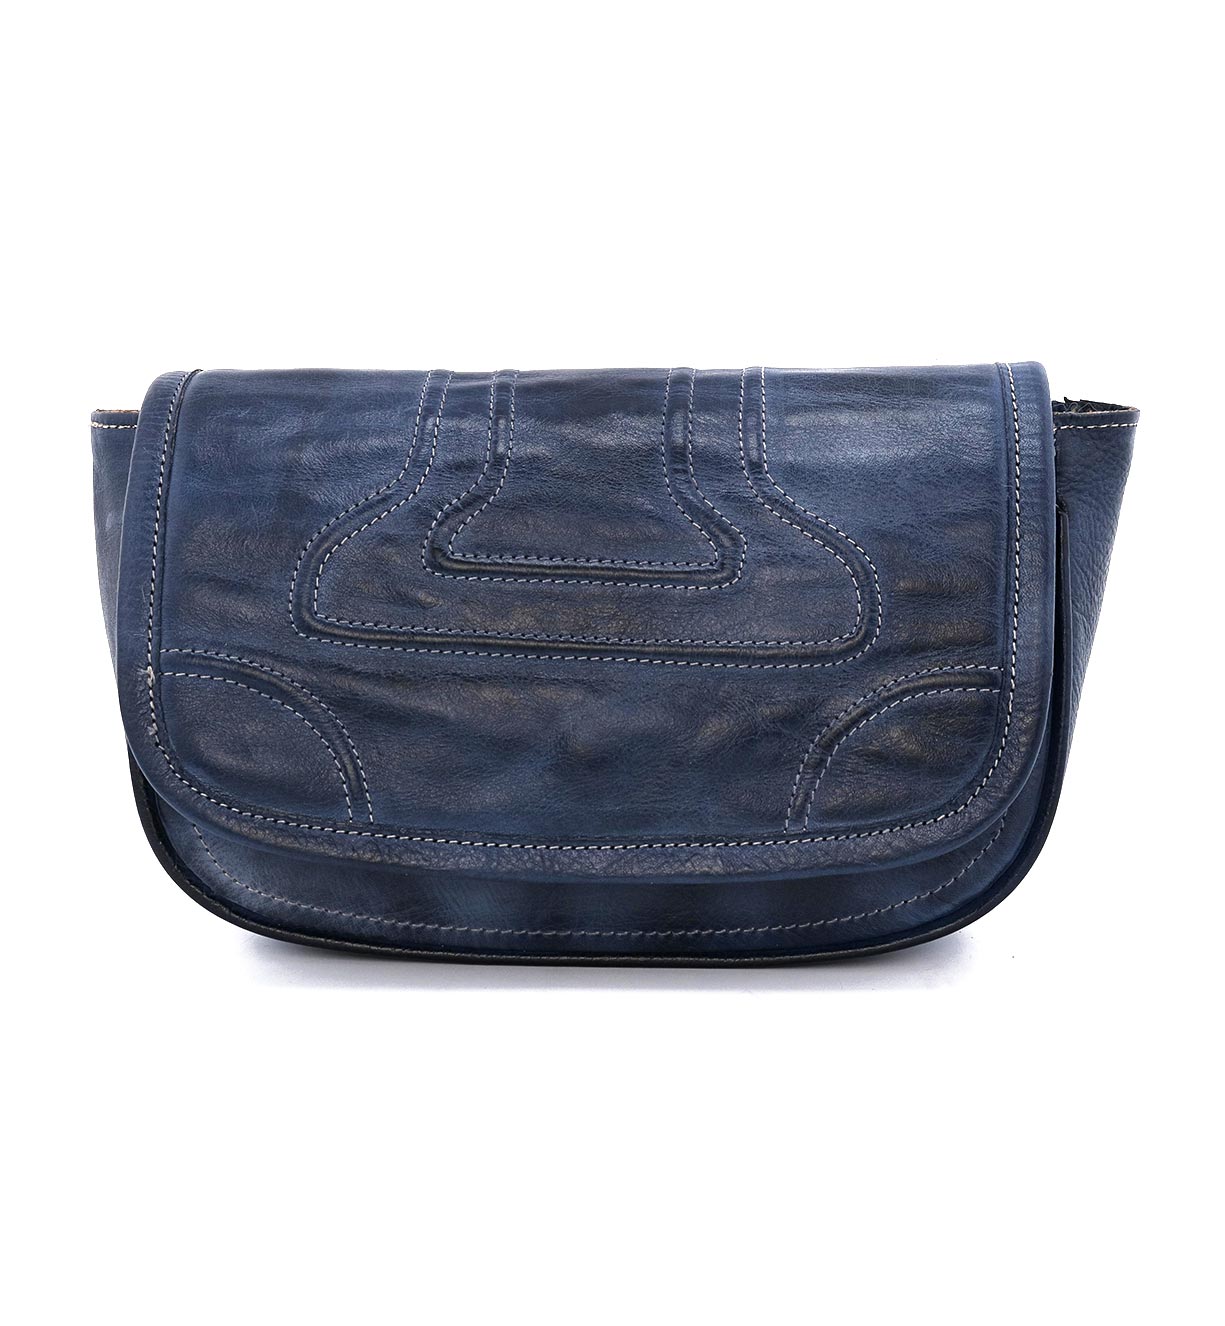 A Travers by Bed Stu blue leather bag with a zipper.